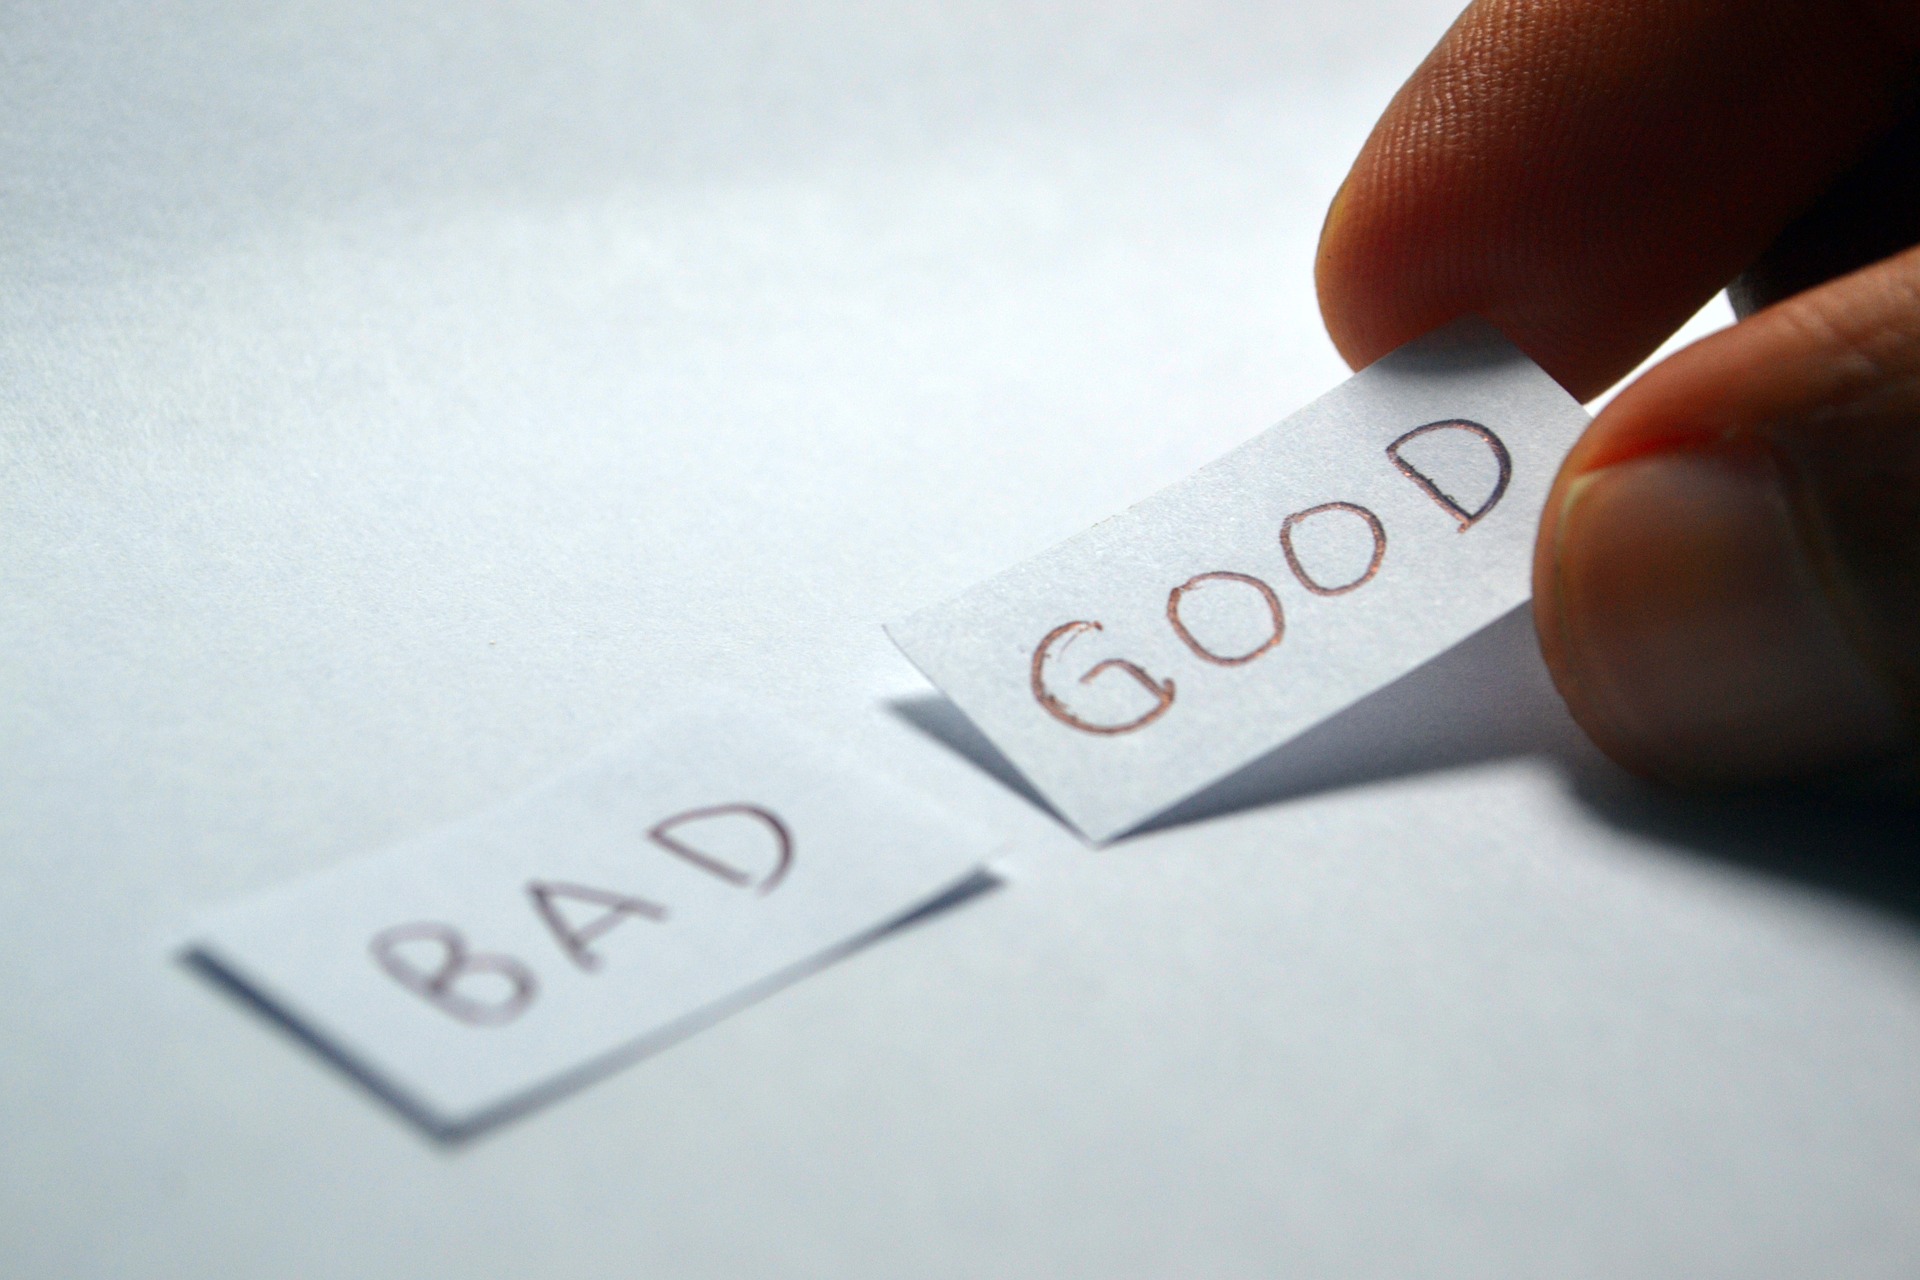 image: 2 pieces of paper saying bad and good. A hand is picking up the one that says good